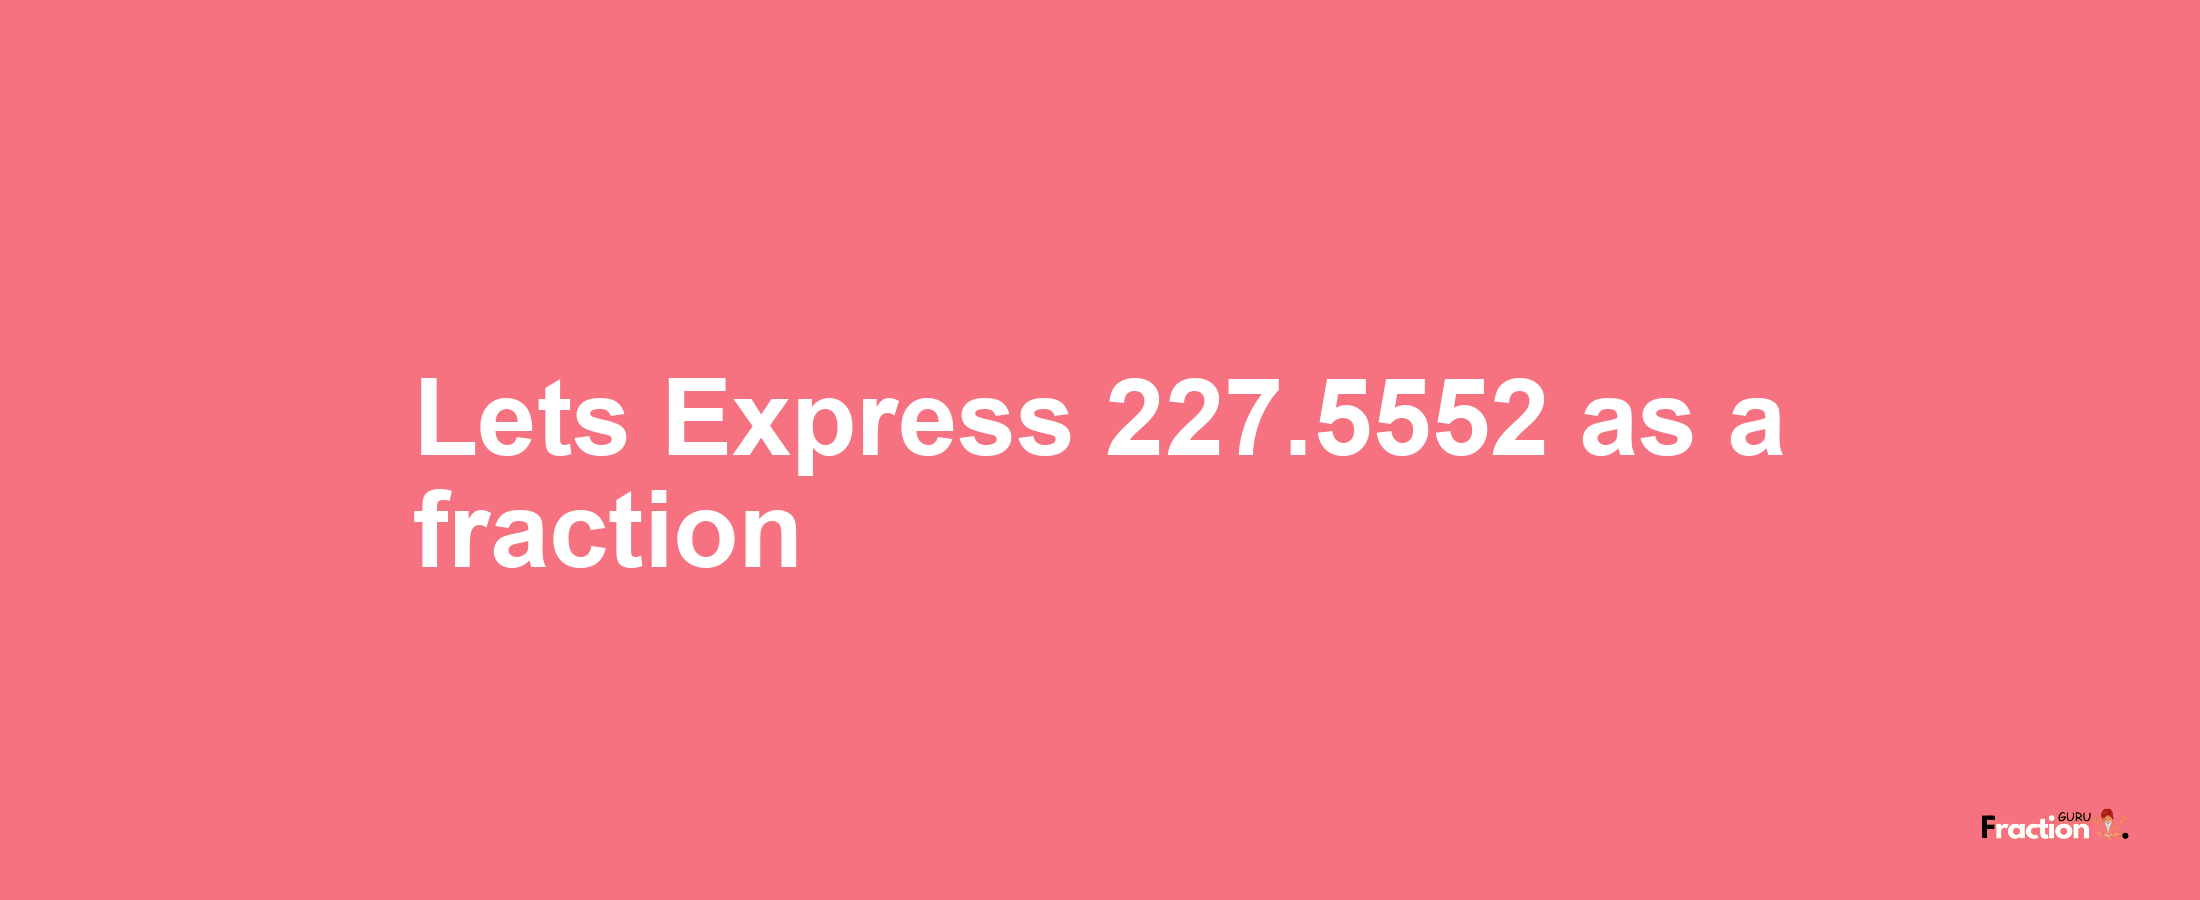 Lets Express 227.5552 as afraction